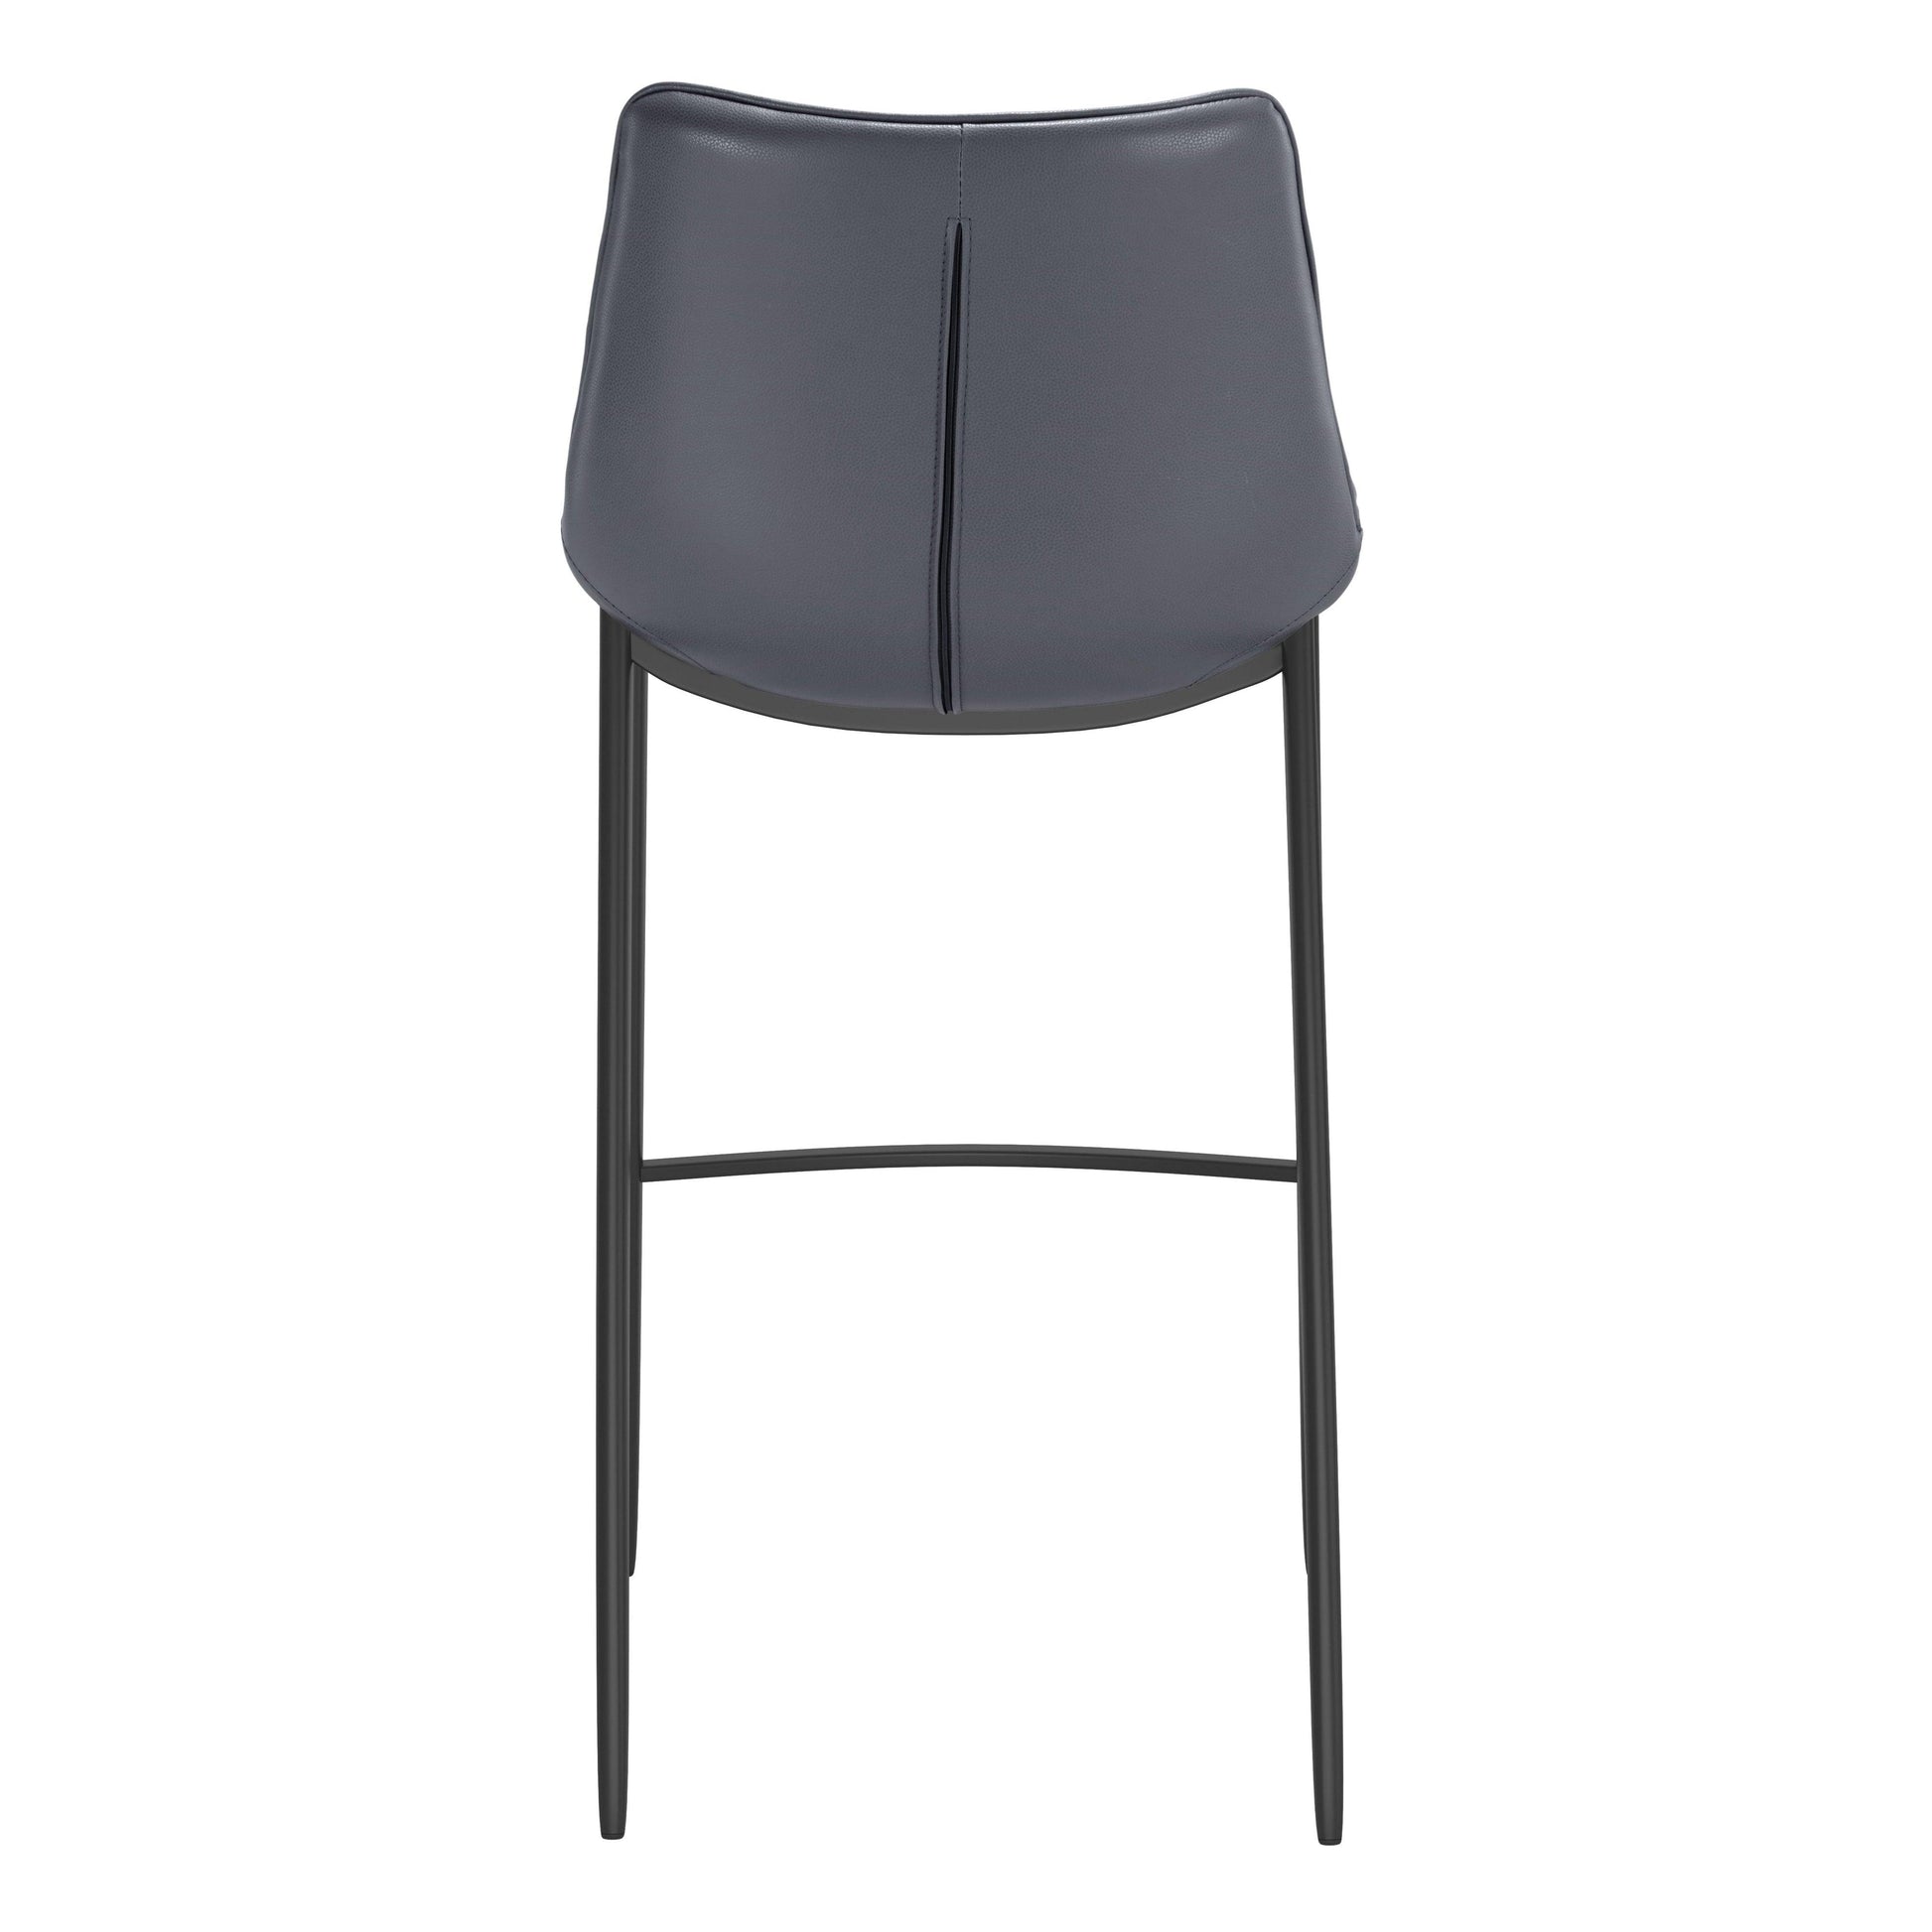 Magnus Bar Chair (Set of 2) Dark Gray & Black - Sideboards and Things Accents_Black, Back Type_Full Back, Back Type_With Back, Brand_Zuo Modern, Color_Black, Color_Gray, Depth_40-50, Features_Adjustable Height, Finish_Hand Painted, Height_20-30, Materials_Metal, Materials_Upholstery, Metal Type_Steel, Number of Pieces_2PC Set, Product Type_Bar Height, Shape_Armless, Upholstery Type_Leather, Upholstery Type_Vegan Leather, Width_20-30